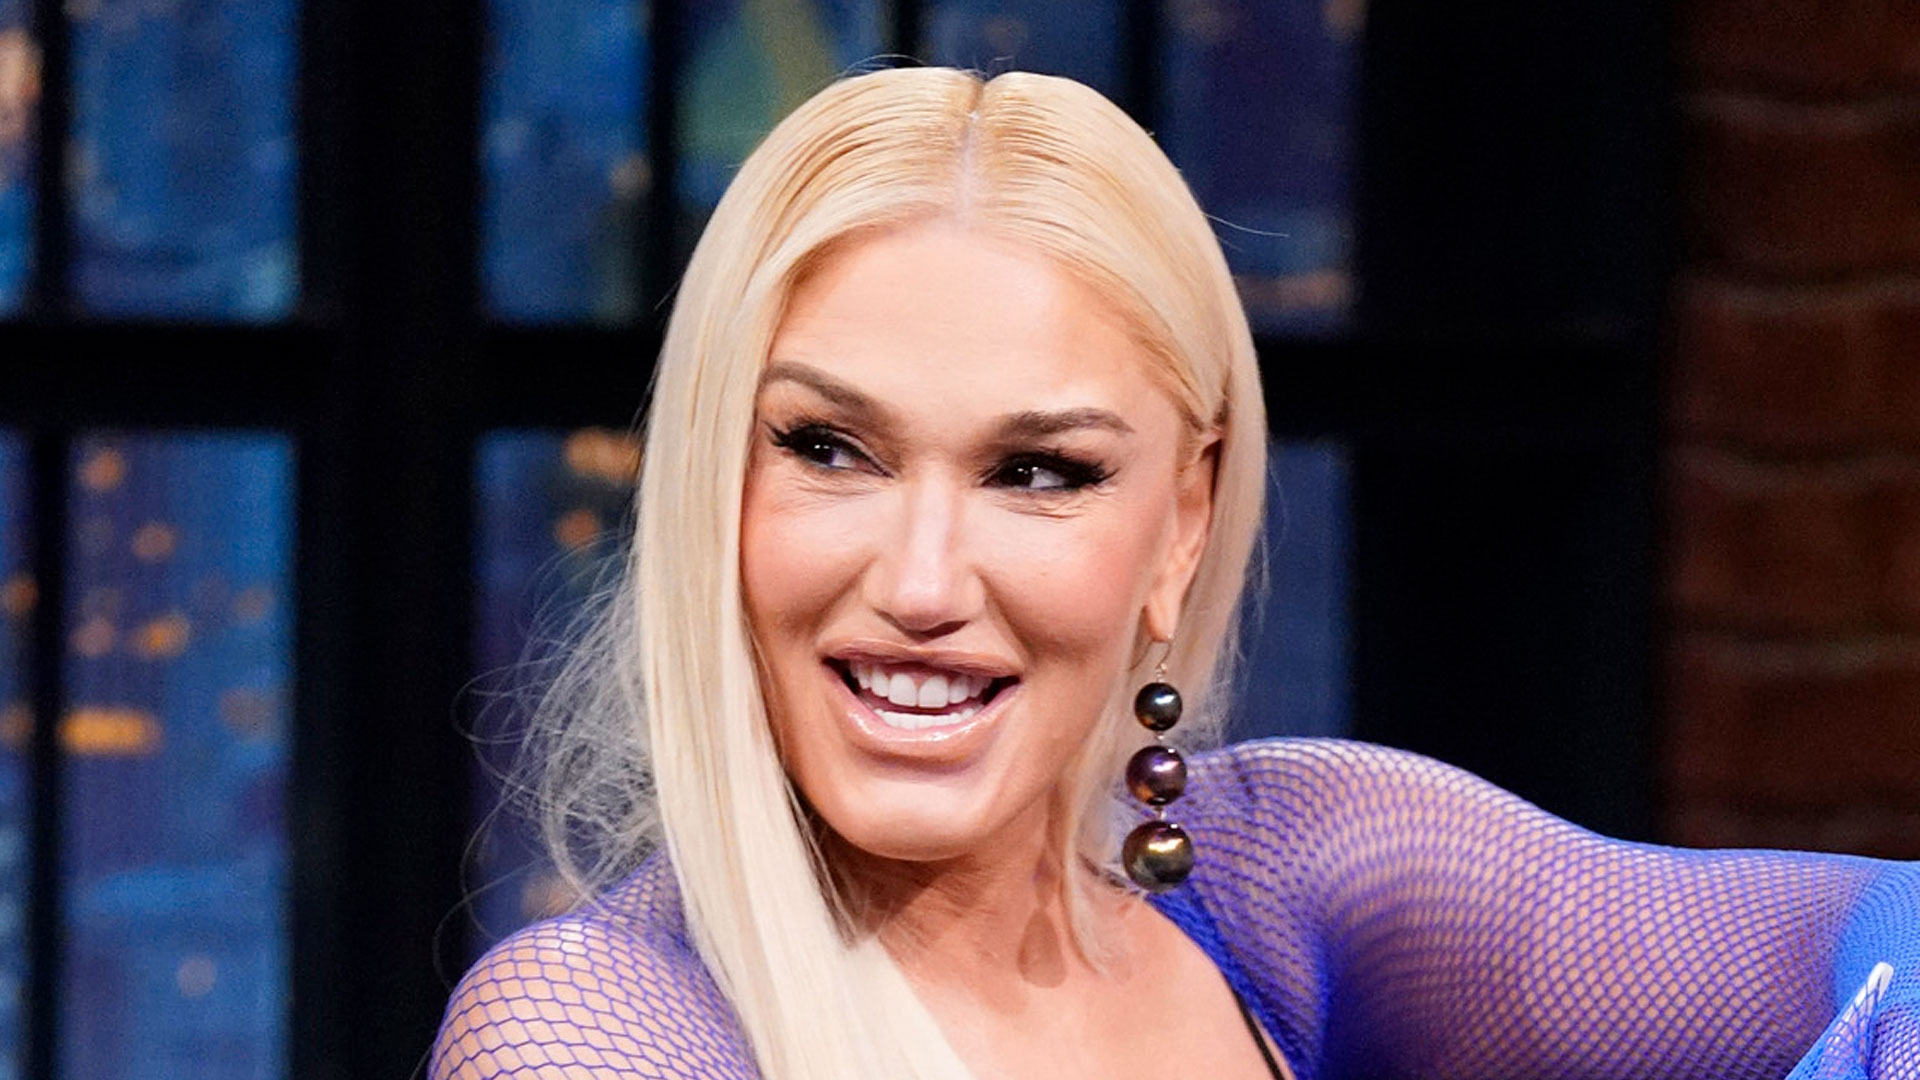 Gwen Stefani, Voice coach, appears to have had a nose job, chin implant and facelift, according to a plastic surgeon pro.